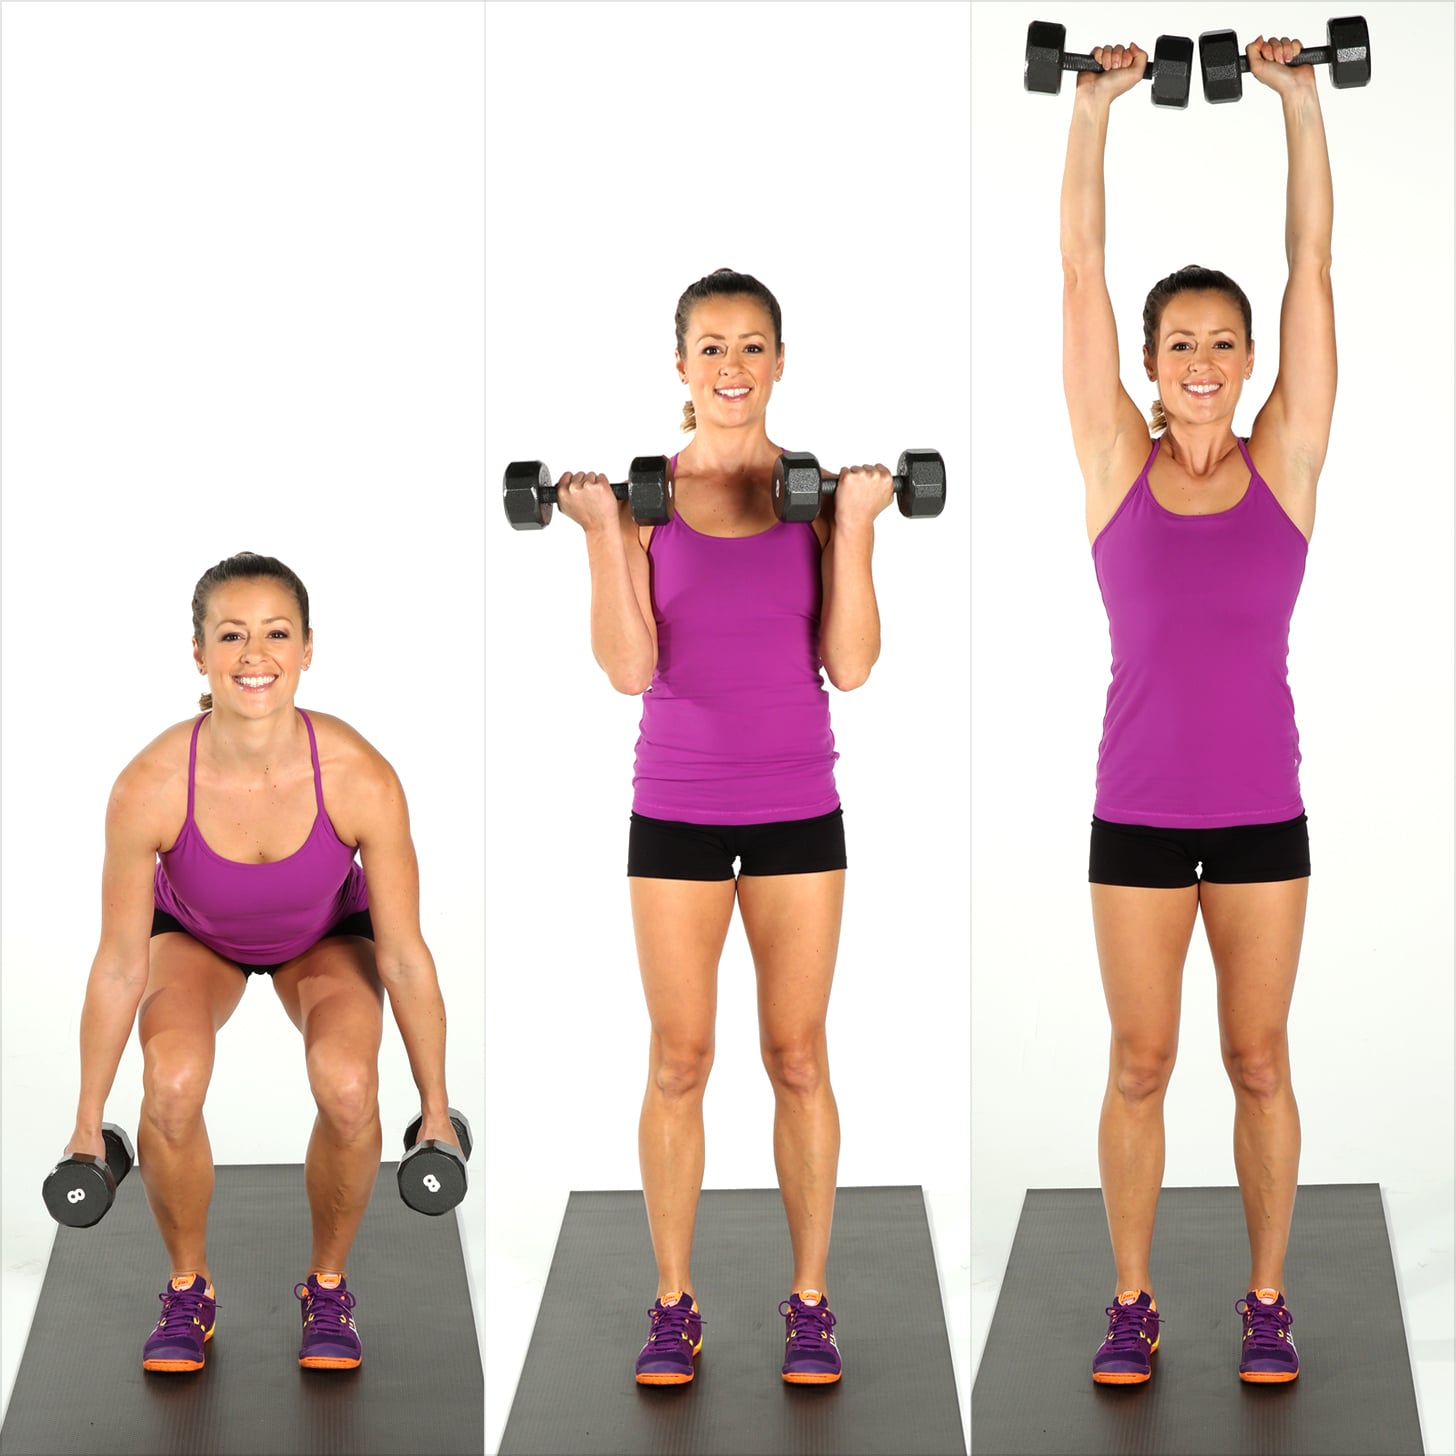 Compound Exercises: Beginner, Intermediate, and Advanced Exercises